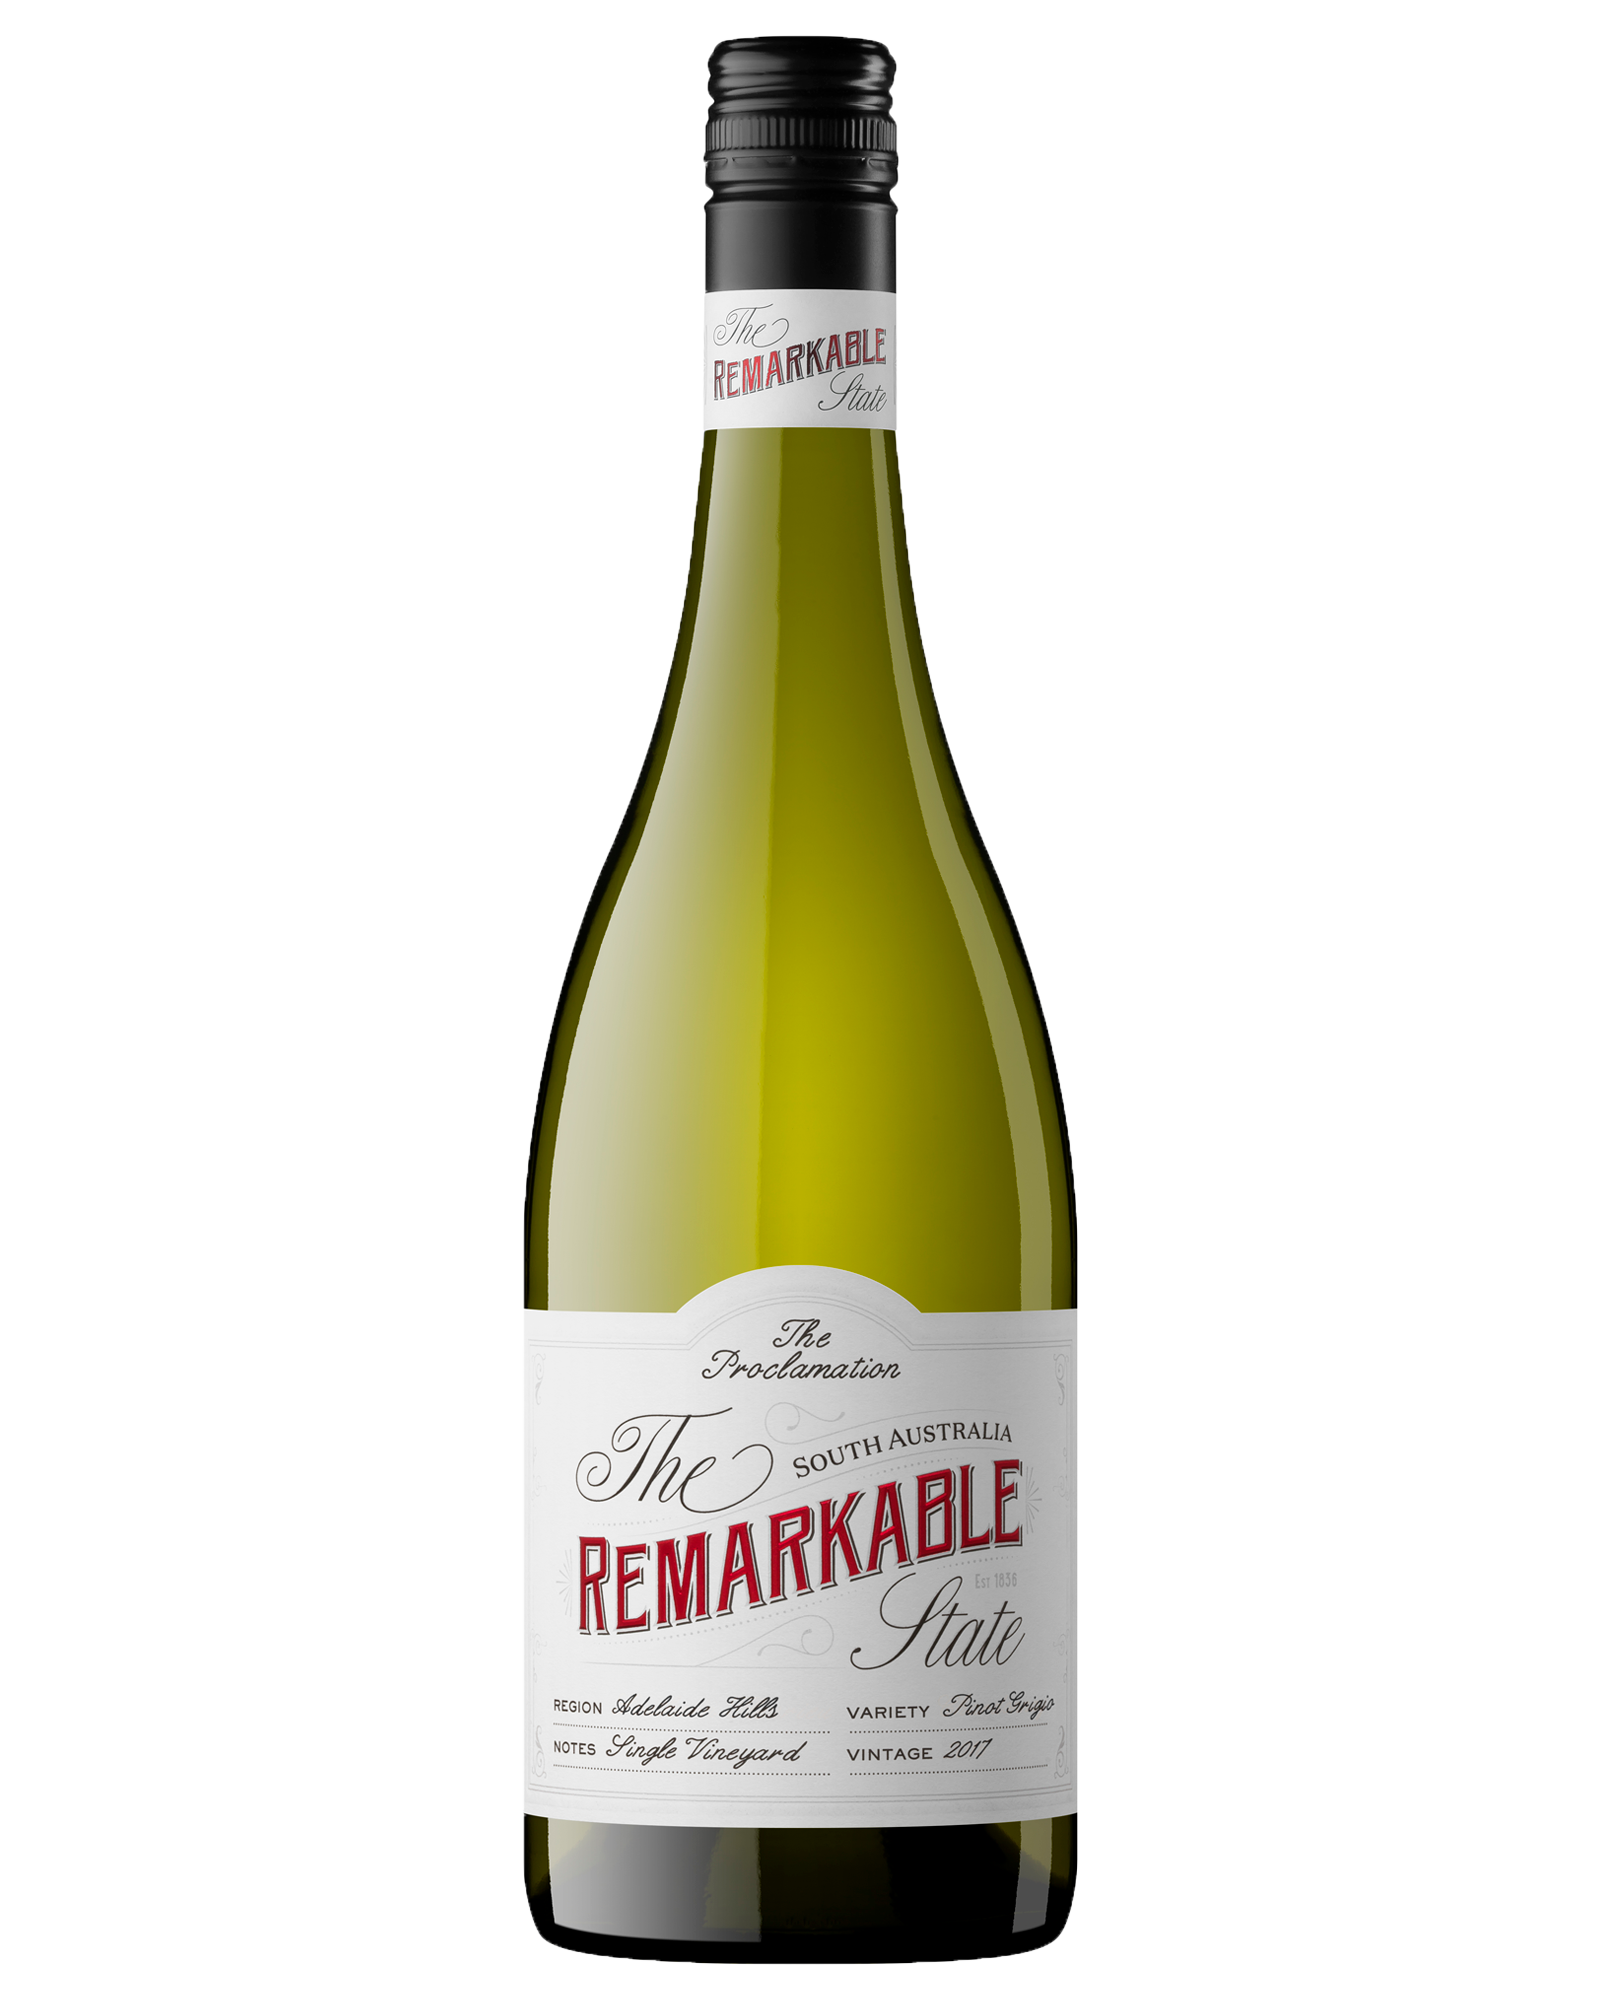 The Remarkable State Proclamation Adelaide Hills Pinot Grigio 2017